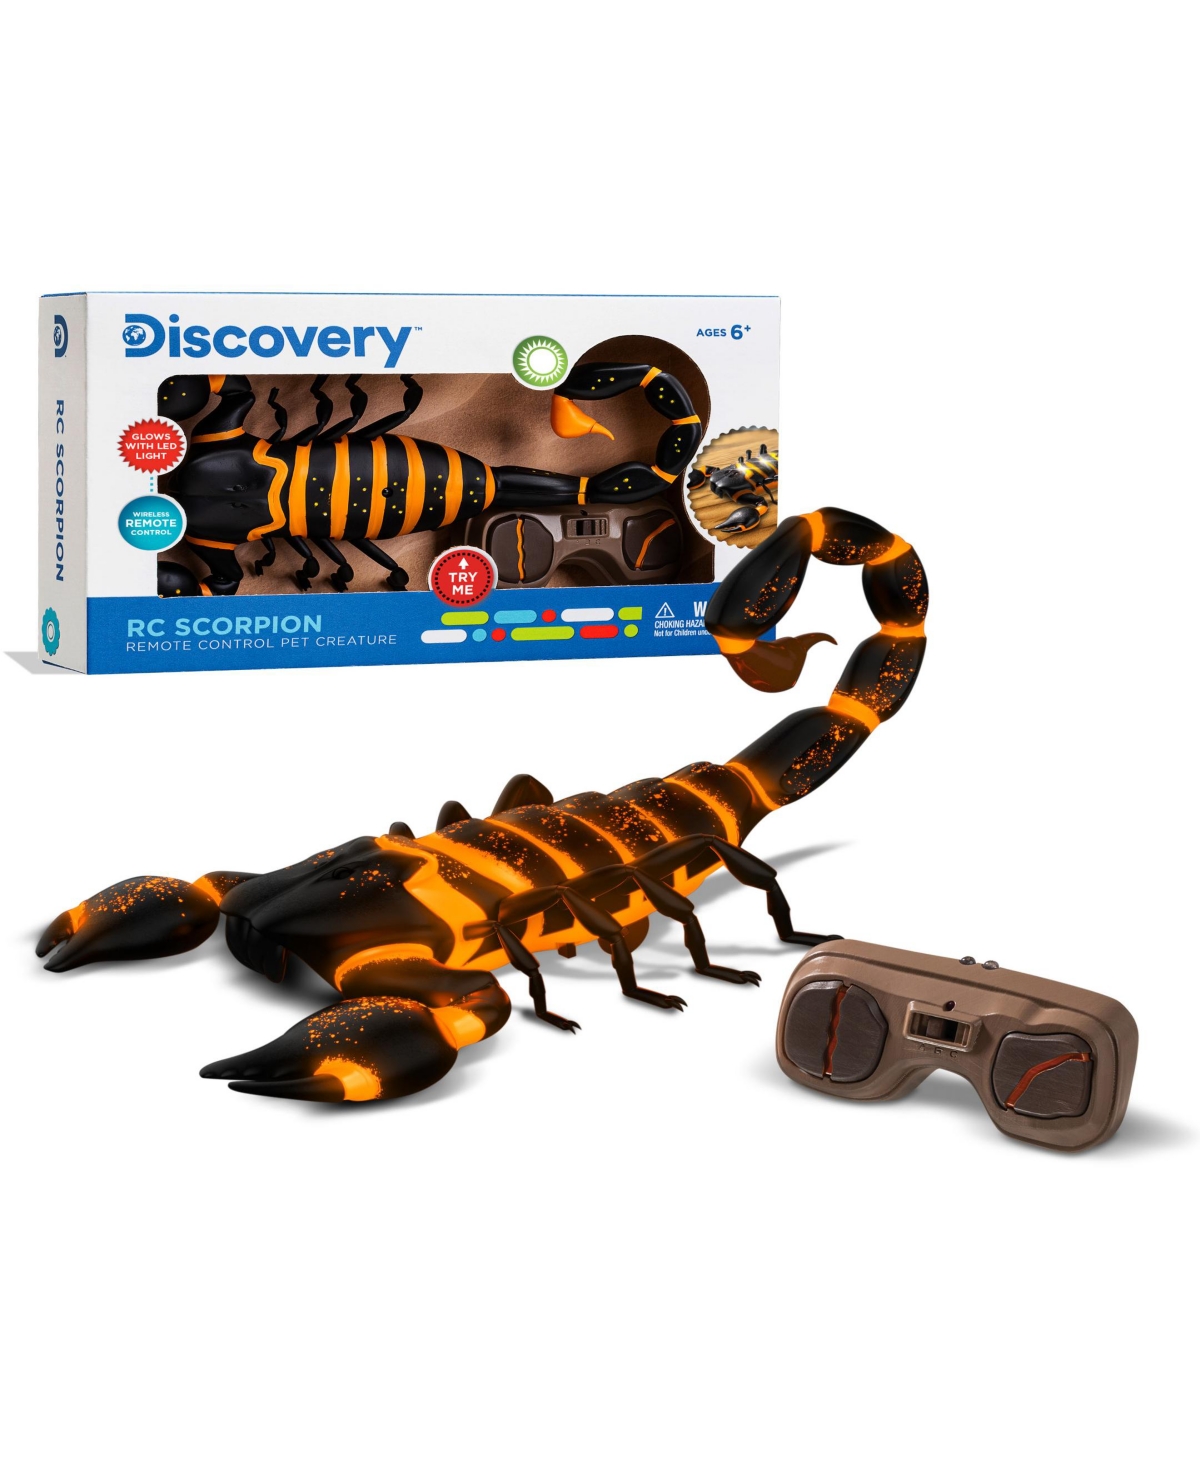 Discovery Rc Scorpion, Glow In The Dark Body, Wireless Remote-control Toy For Kids In Black